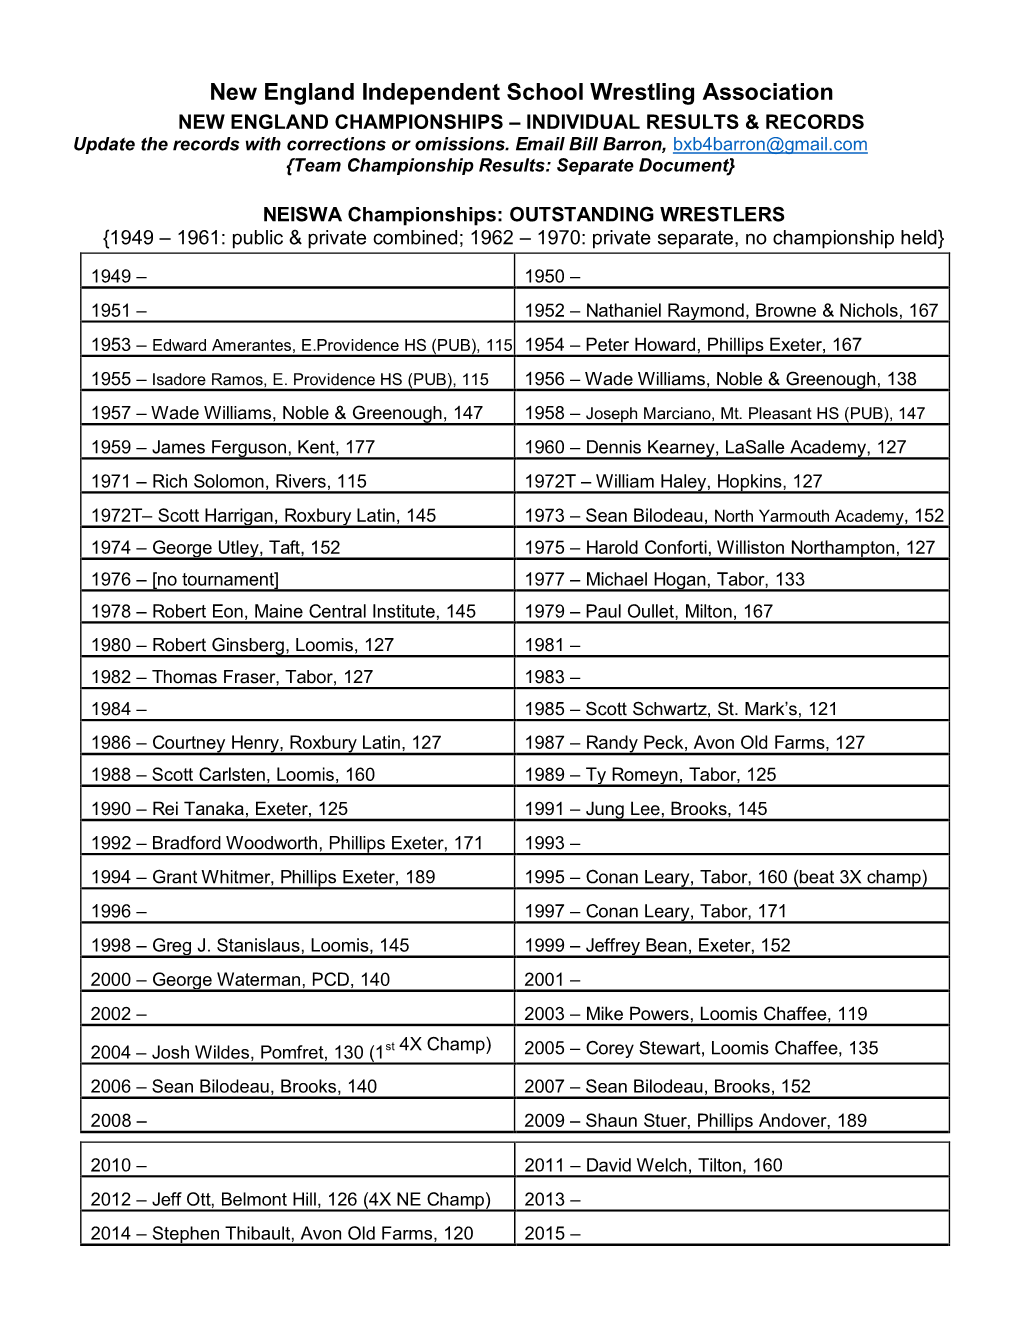 New England Independent School Wrestling Association NEW ENGLAND CHAMPIONSHIPS – INDIVIDUAL RESULTS & RECORDS Update the Records with Corrections Or Omissions